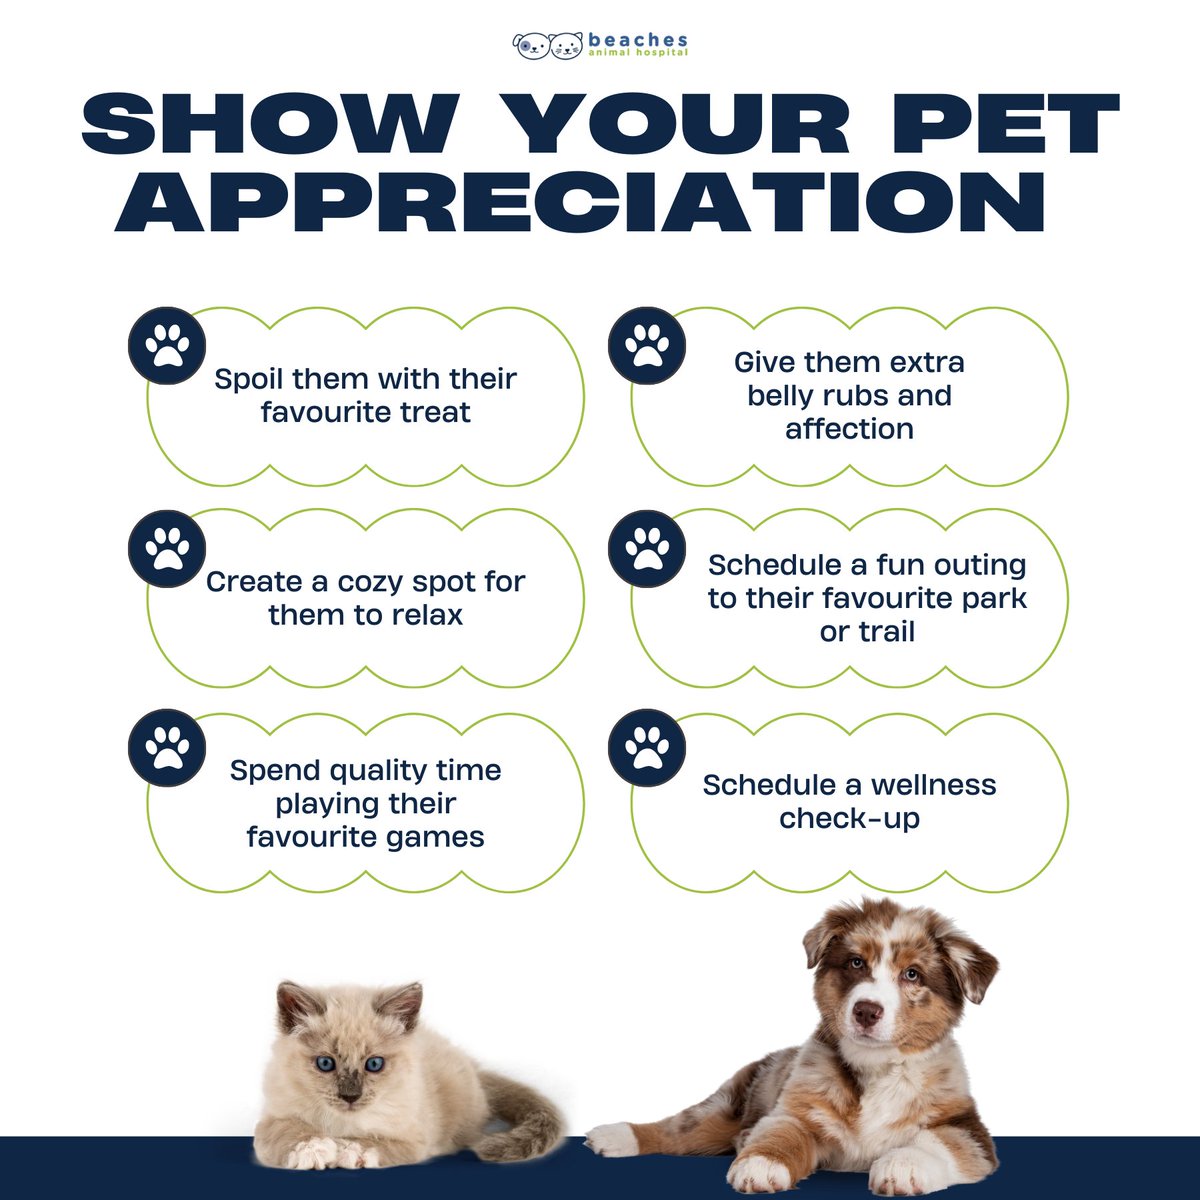 From playtime to pampering, these gestures ensure your pet feels cherished daily. How will you spoil your pet this week? Share your love in the comments! 💕 #PetAppreciationWeek

#love #instagood #cute #pet #petstagram #photooftheday #instamood #adorable #instapet